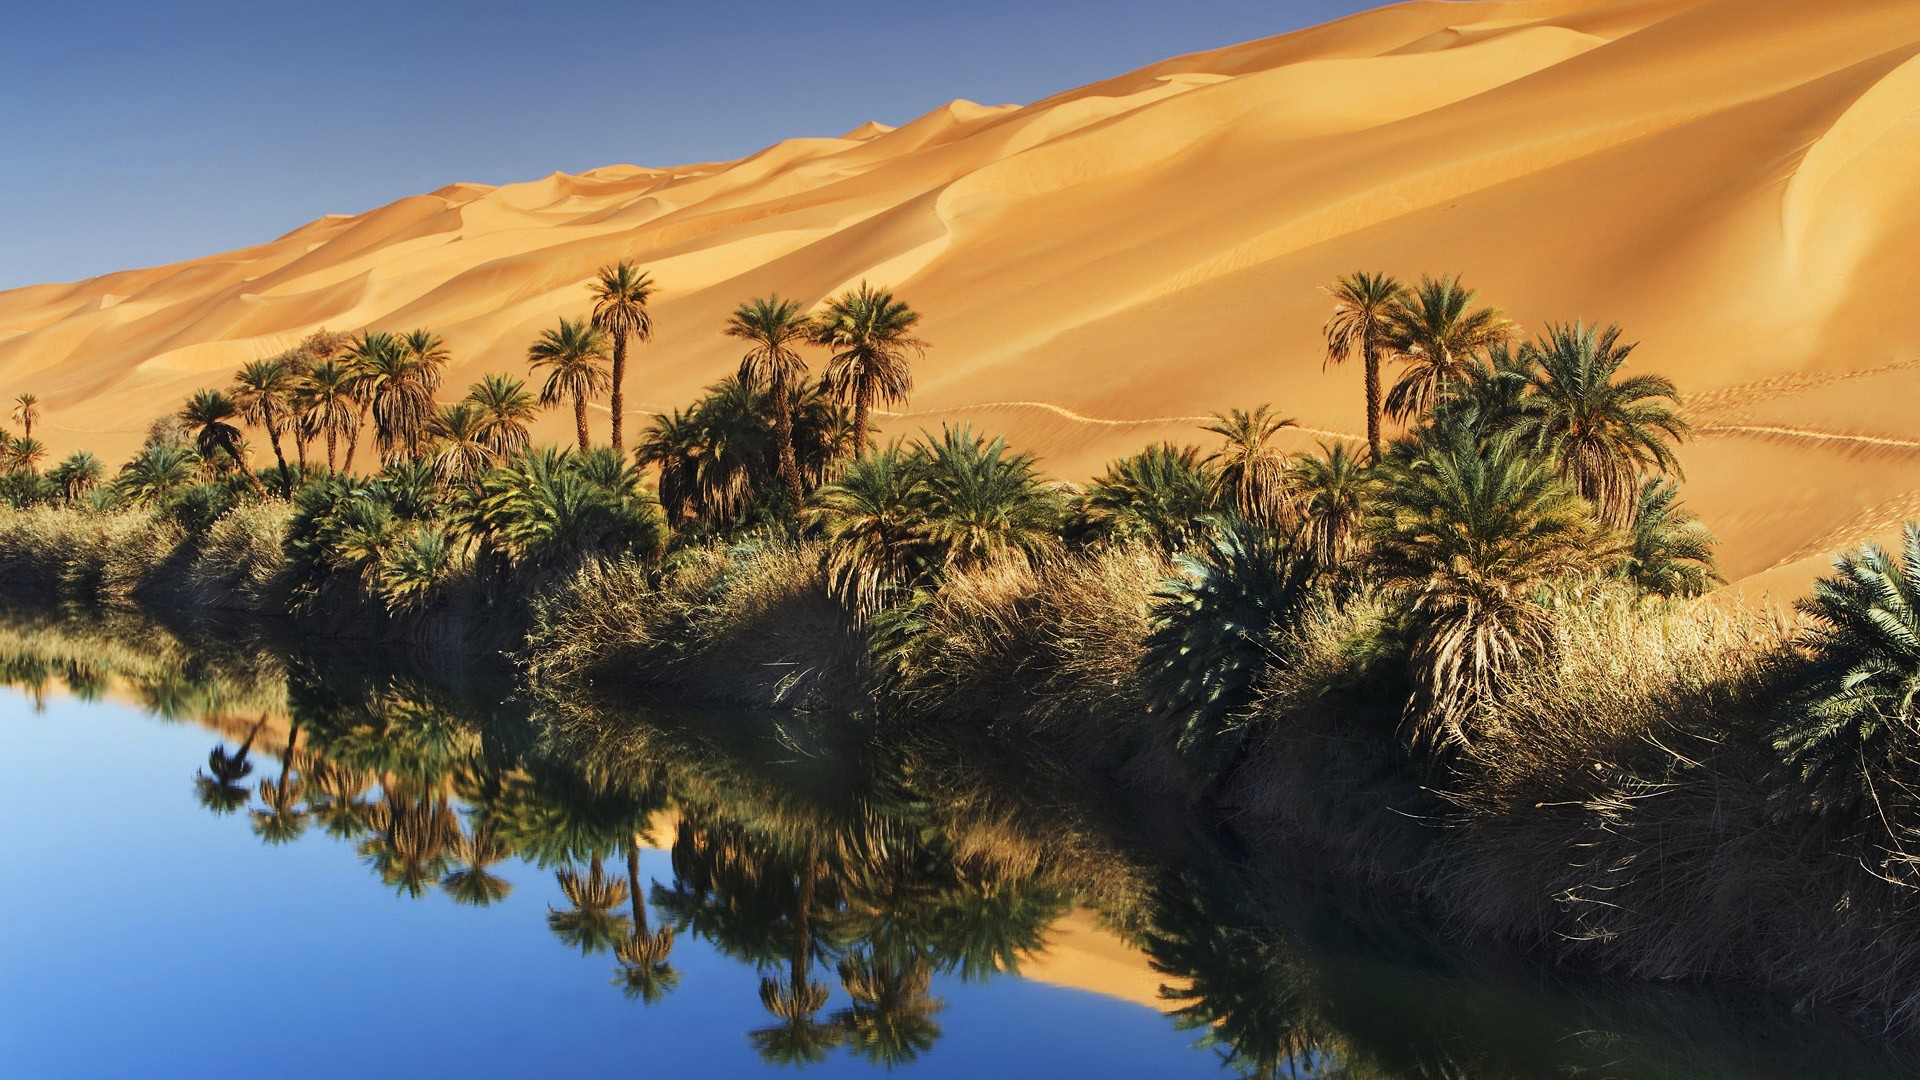 General 1920x1080 palm trees oasis dunes reflection water desert